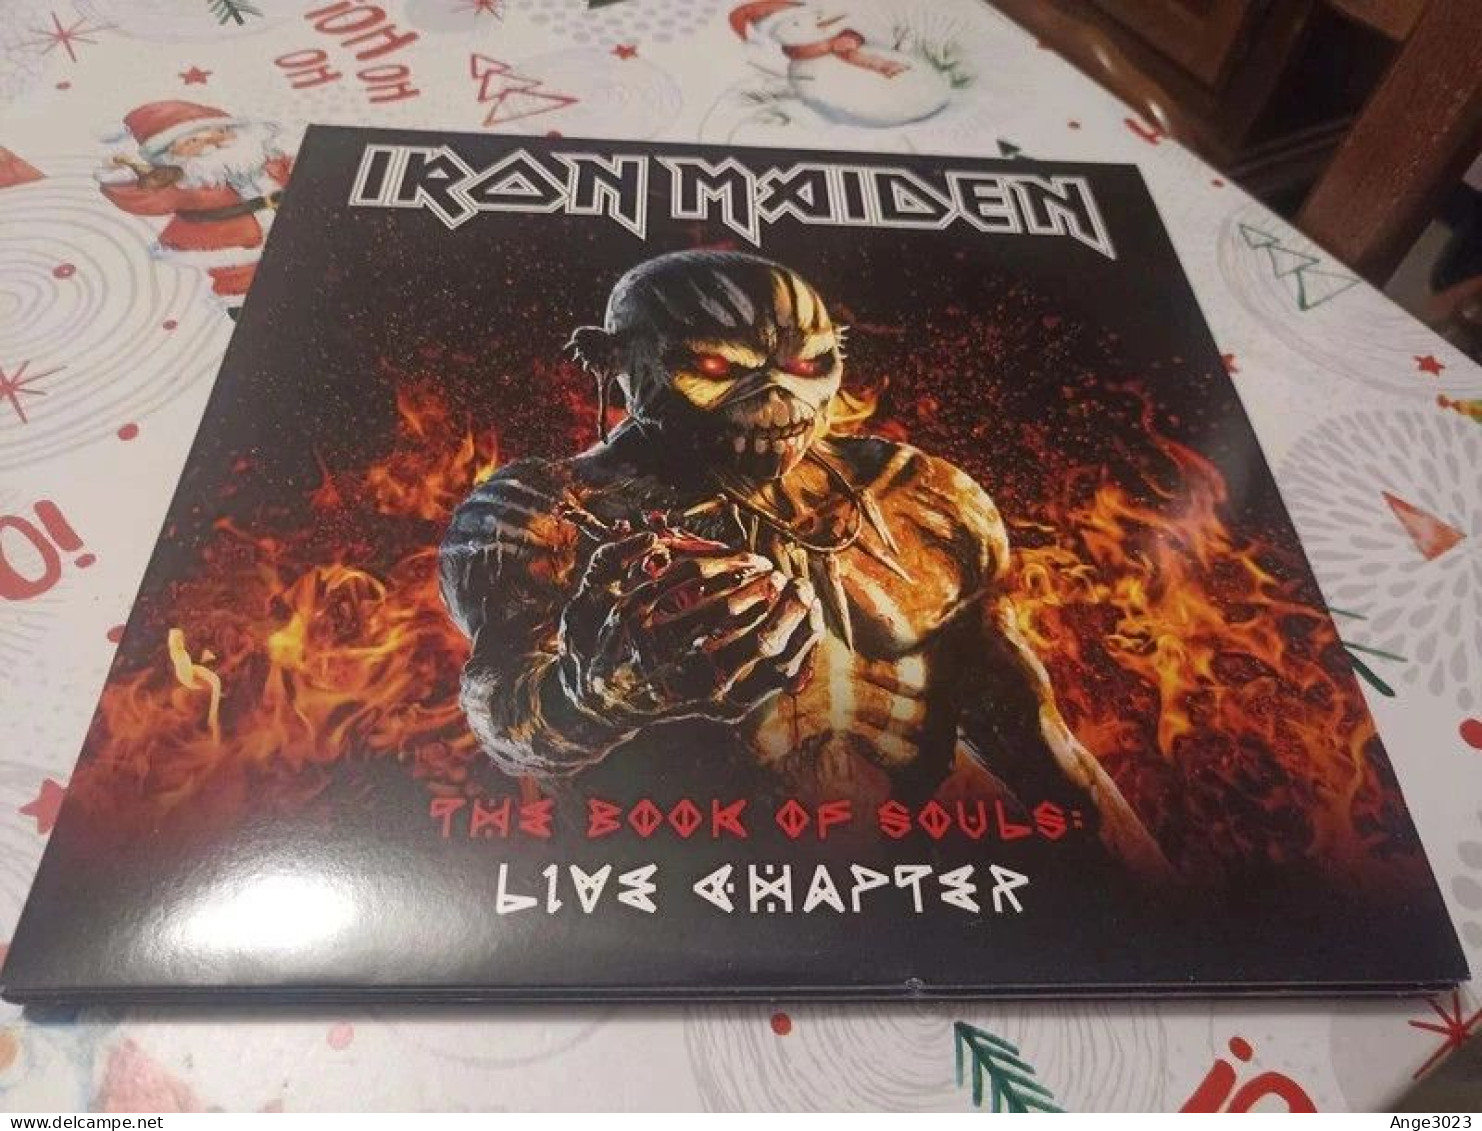 IRON MAIDEN "The Book Of Souls Live Chapter" - Hard Rock & Metal